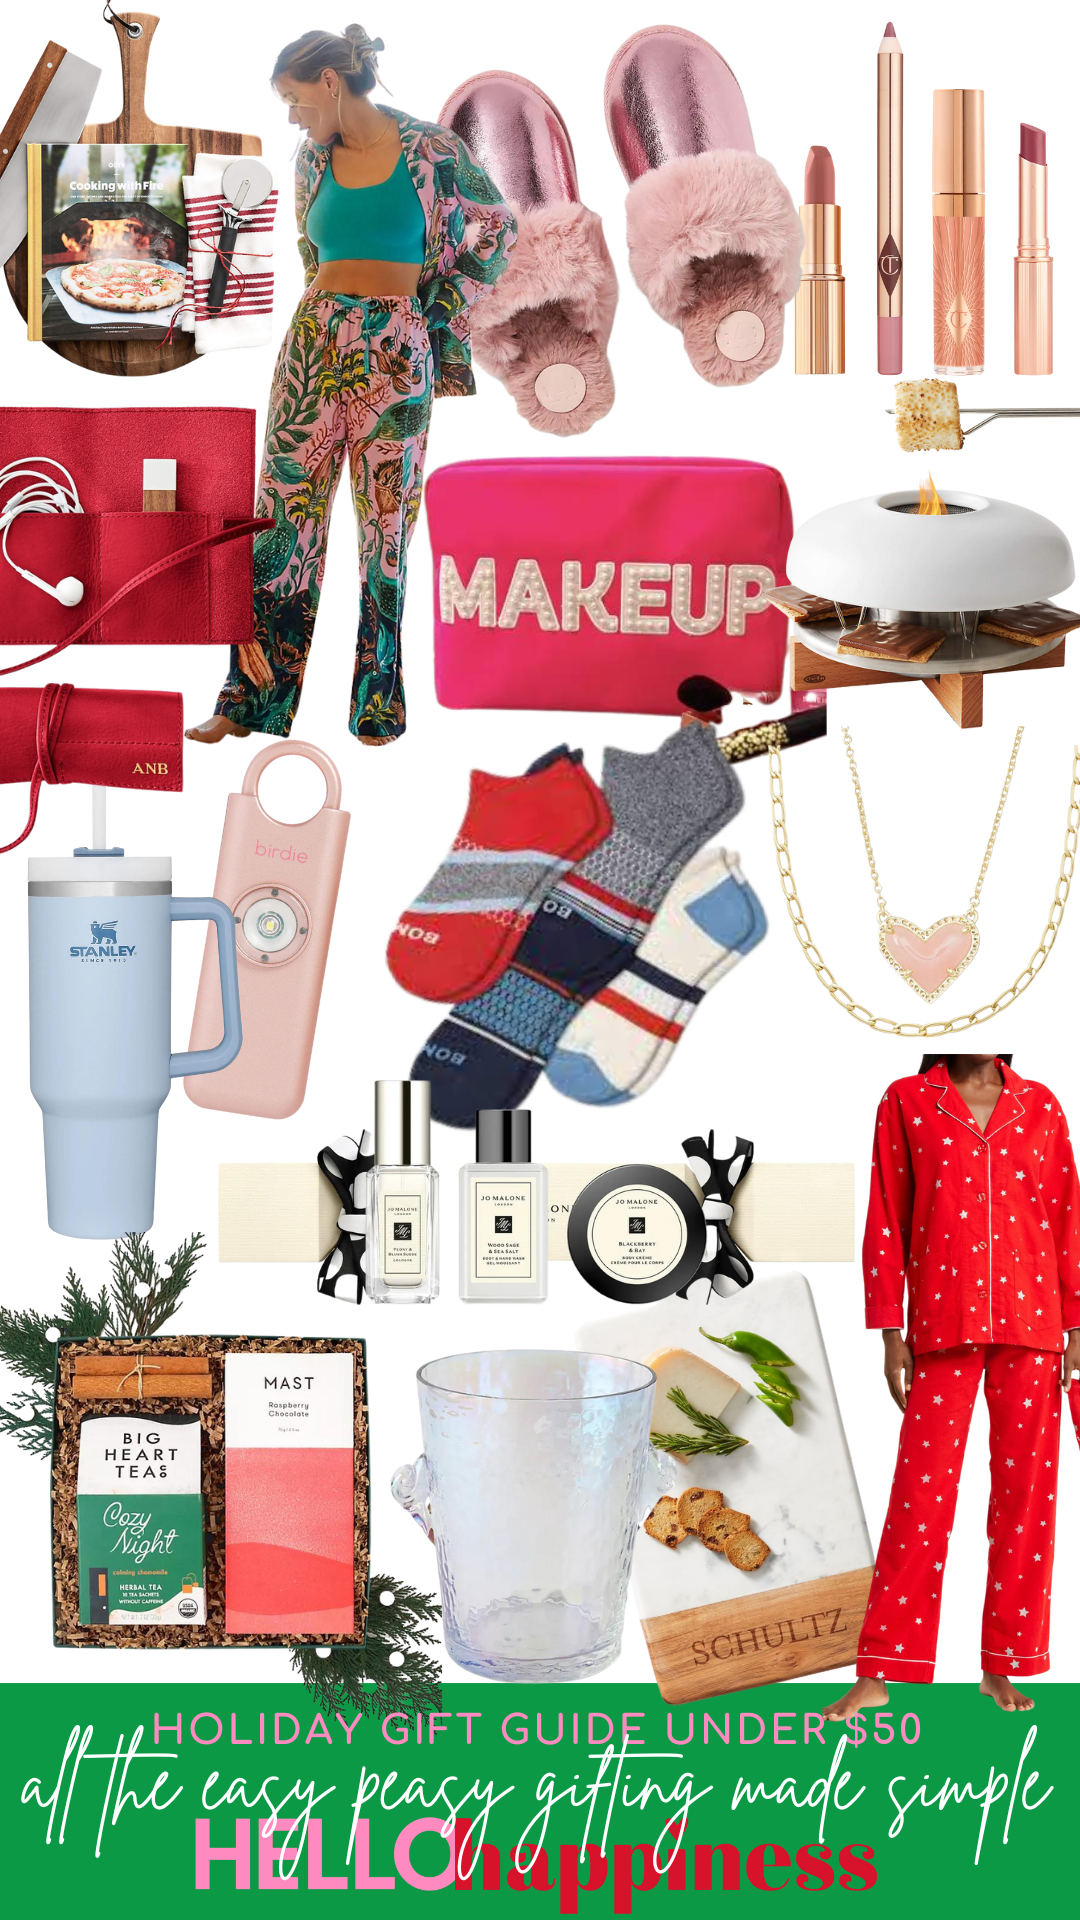 Favorite Things Party Gift Ideas (Under $30)